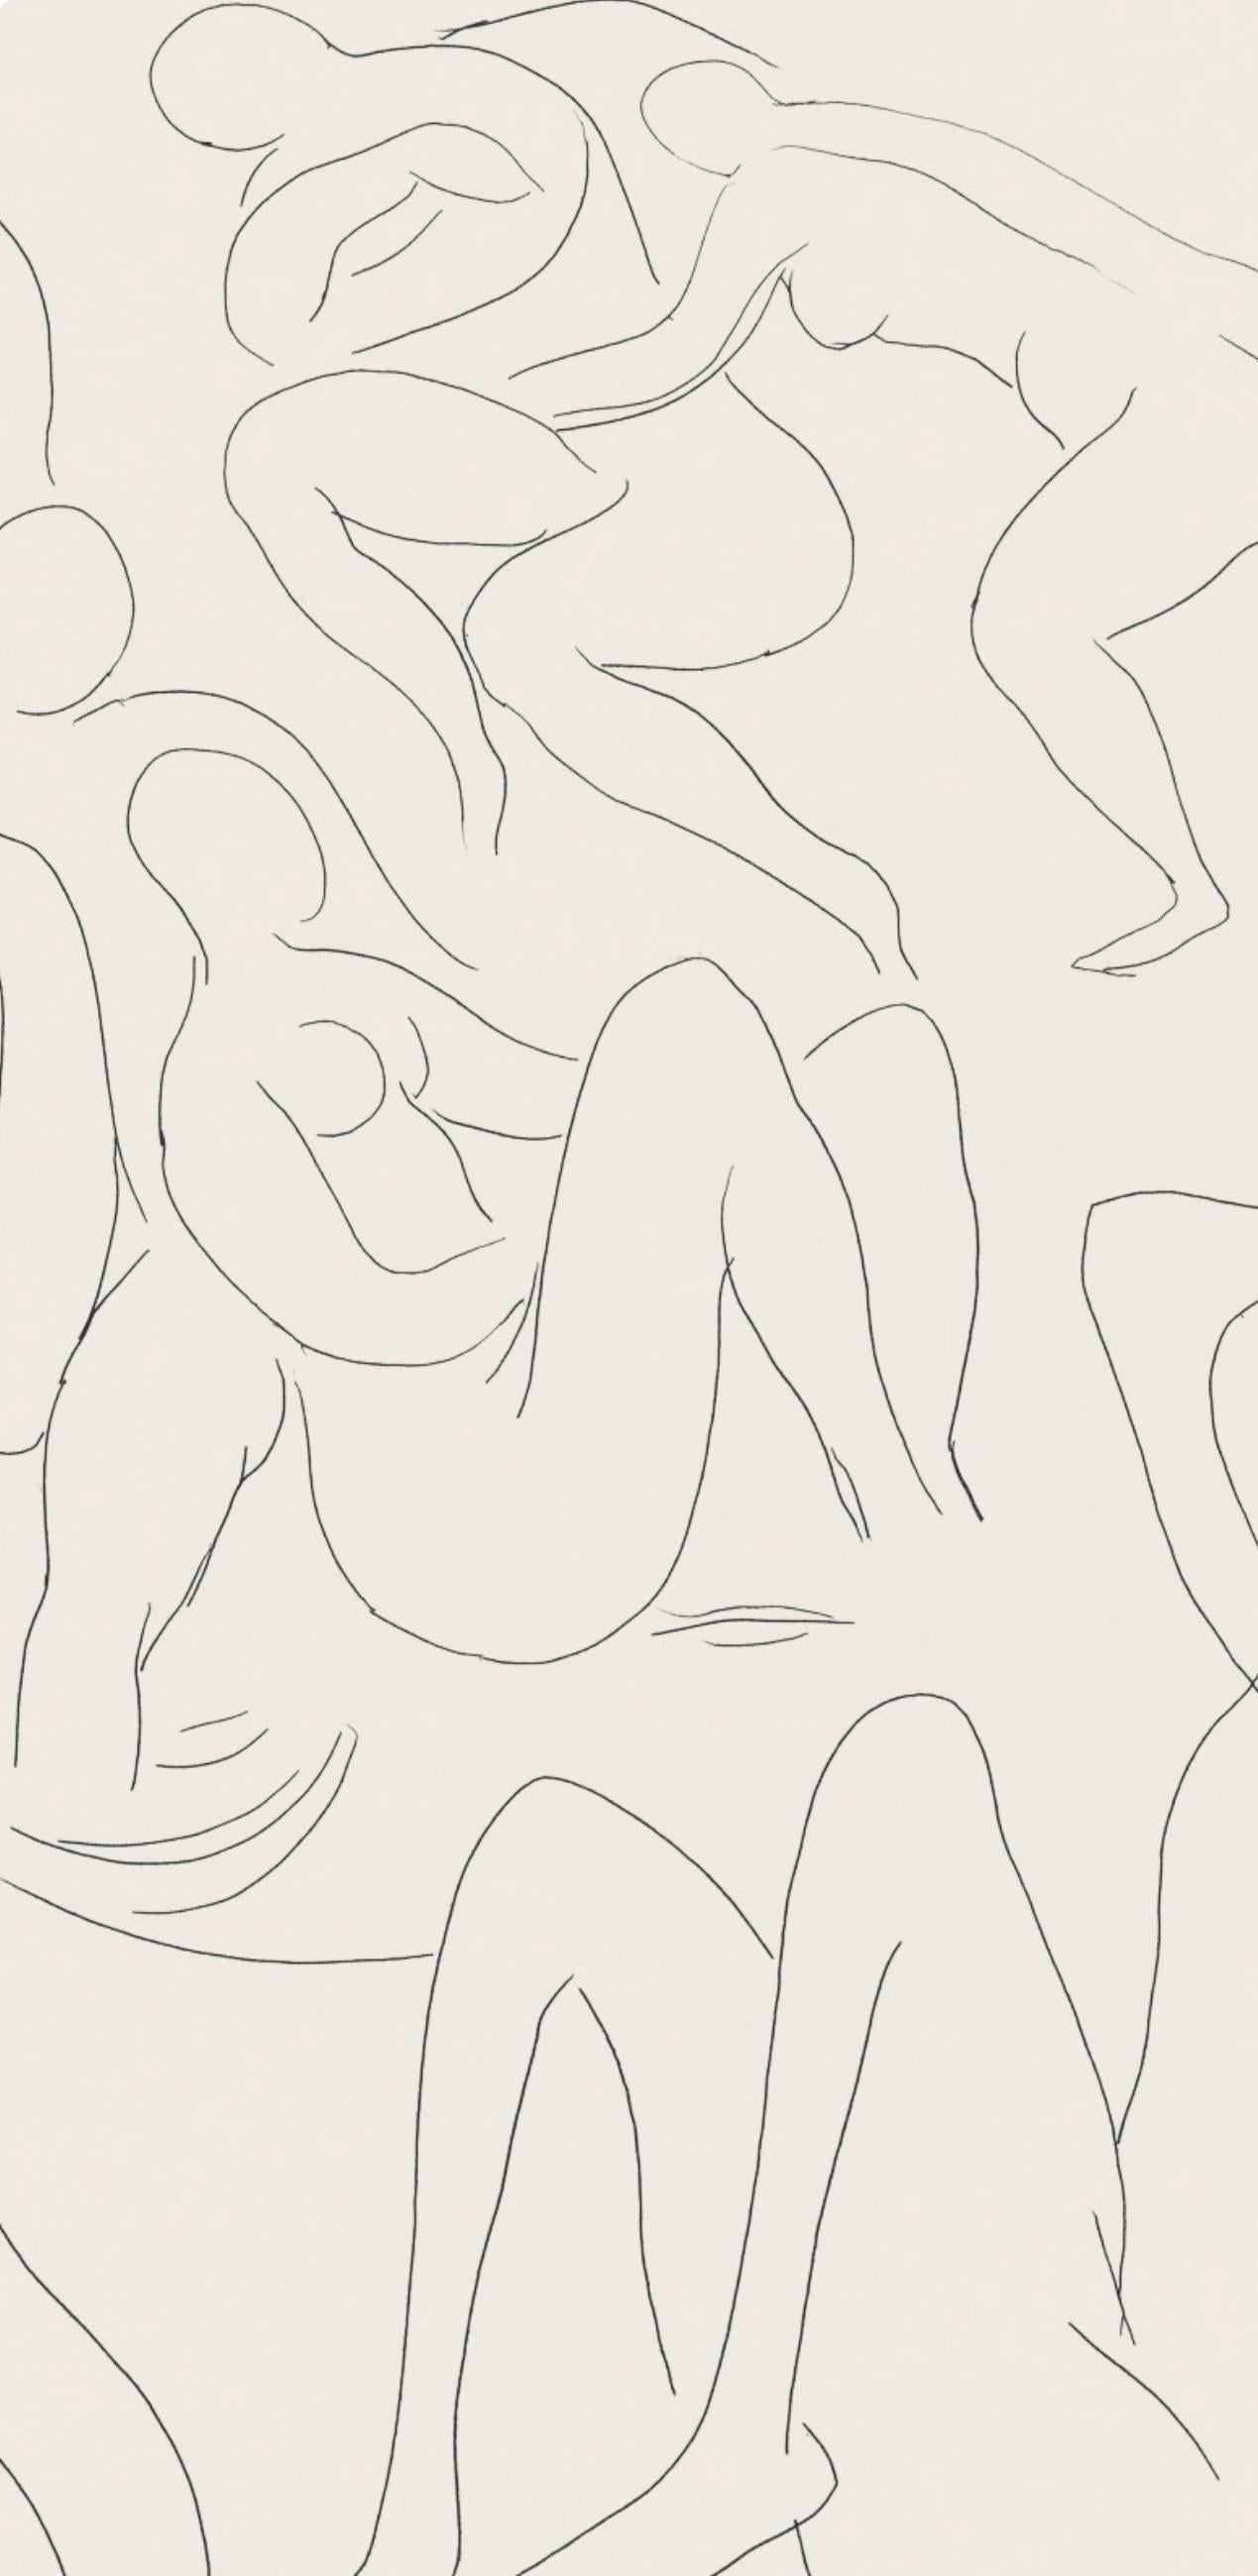 Matisse, Nymphes et faune (Nymphs and Faun), Poésies (after) - Modern Print by Henri Matisse